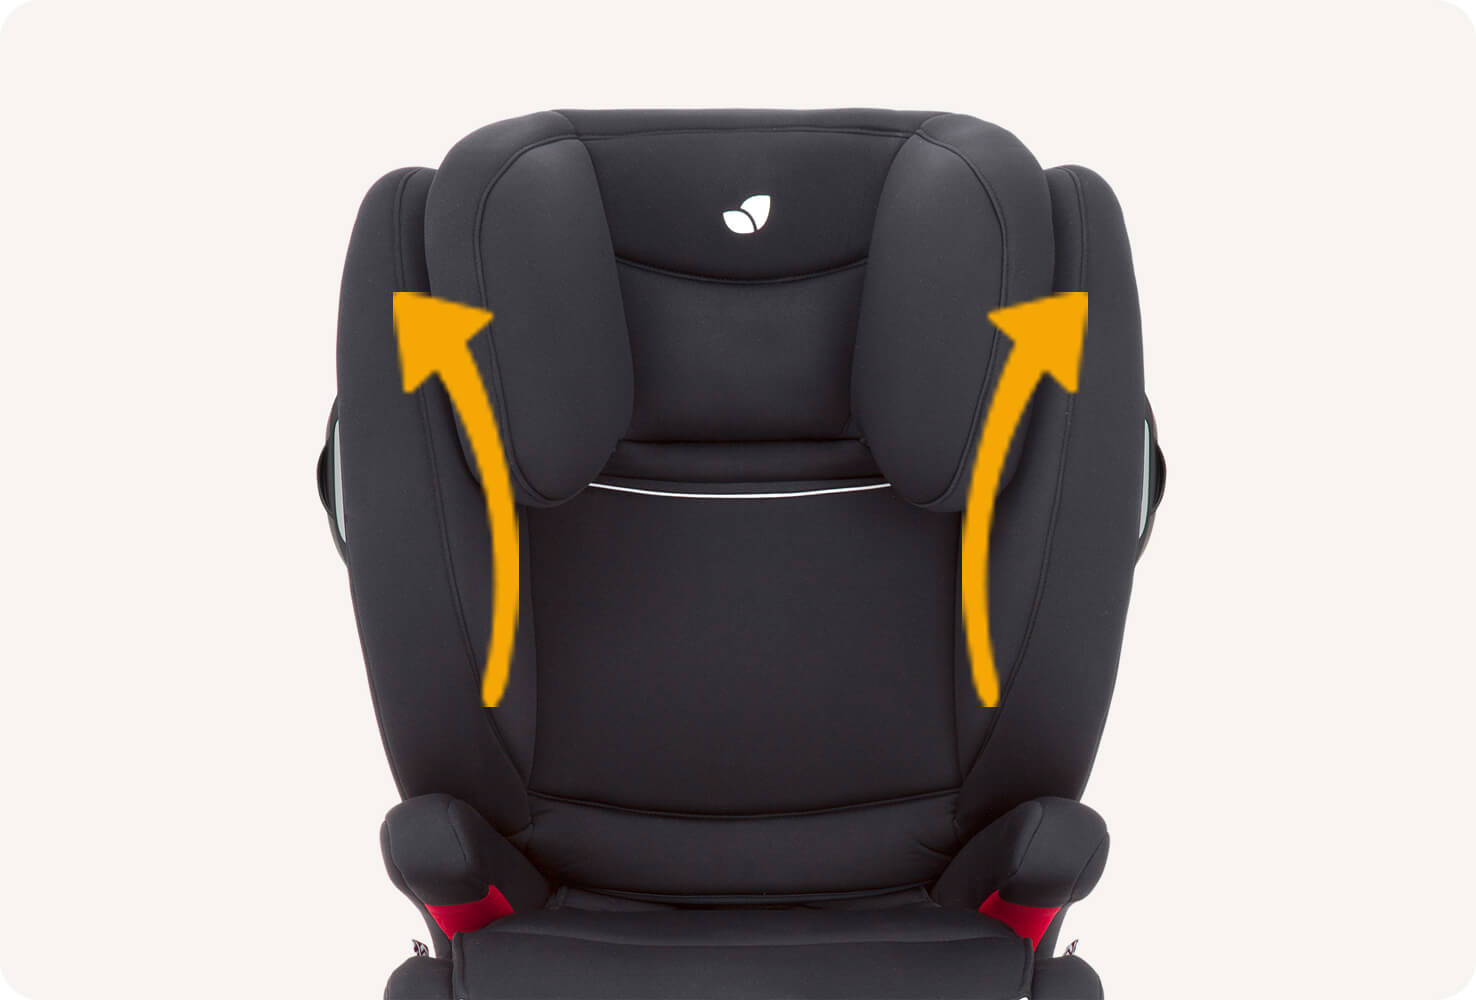 Closeup on a black Transcend booster seat with two curved orange arrows indicating the shoulders of the seat widening.